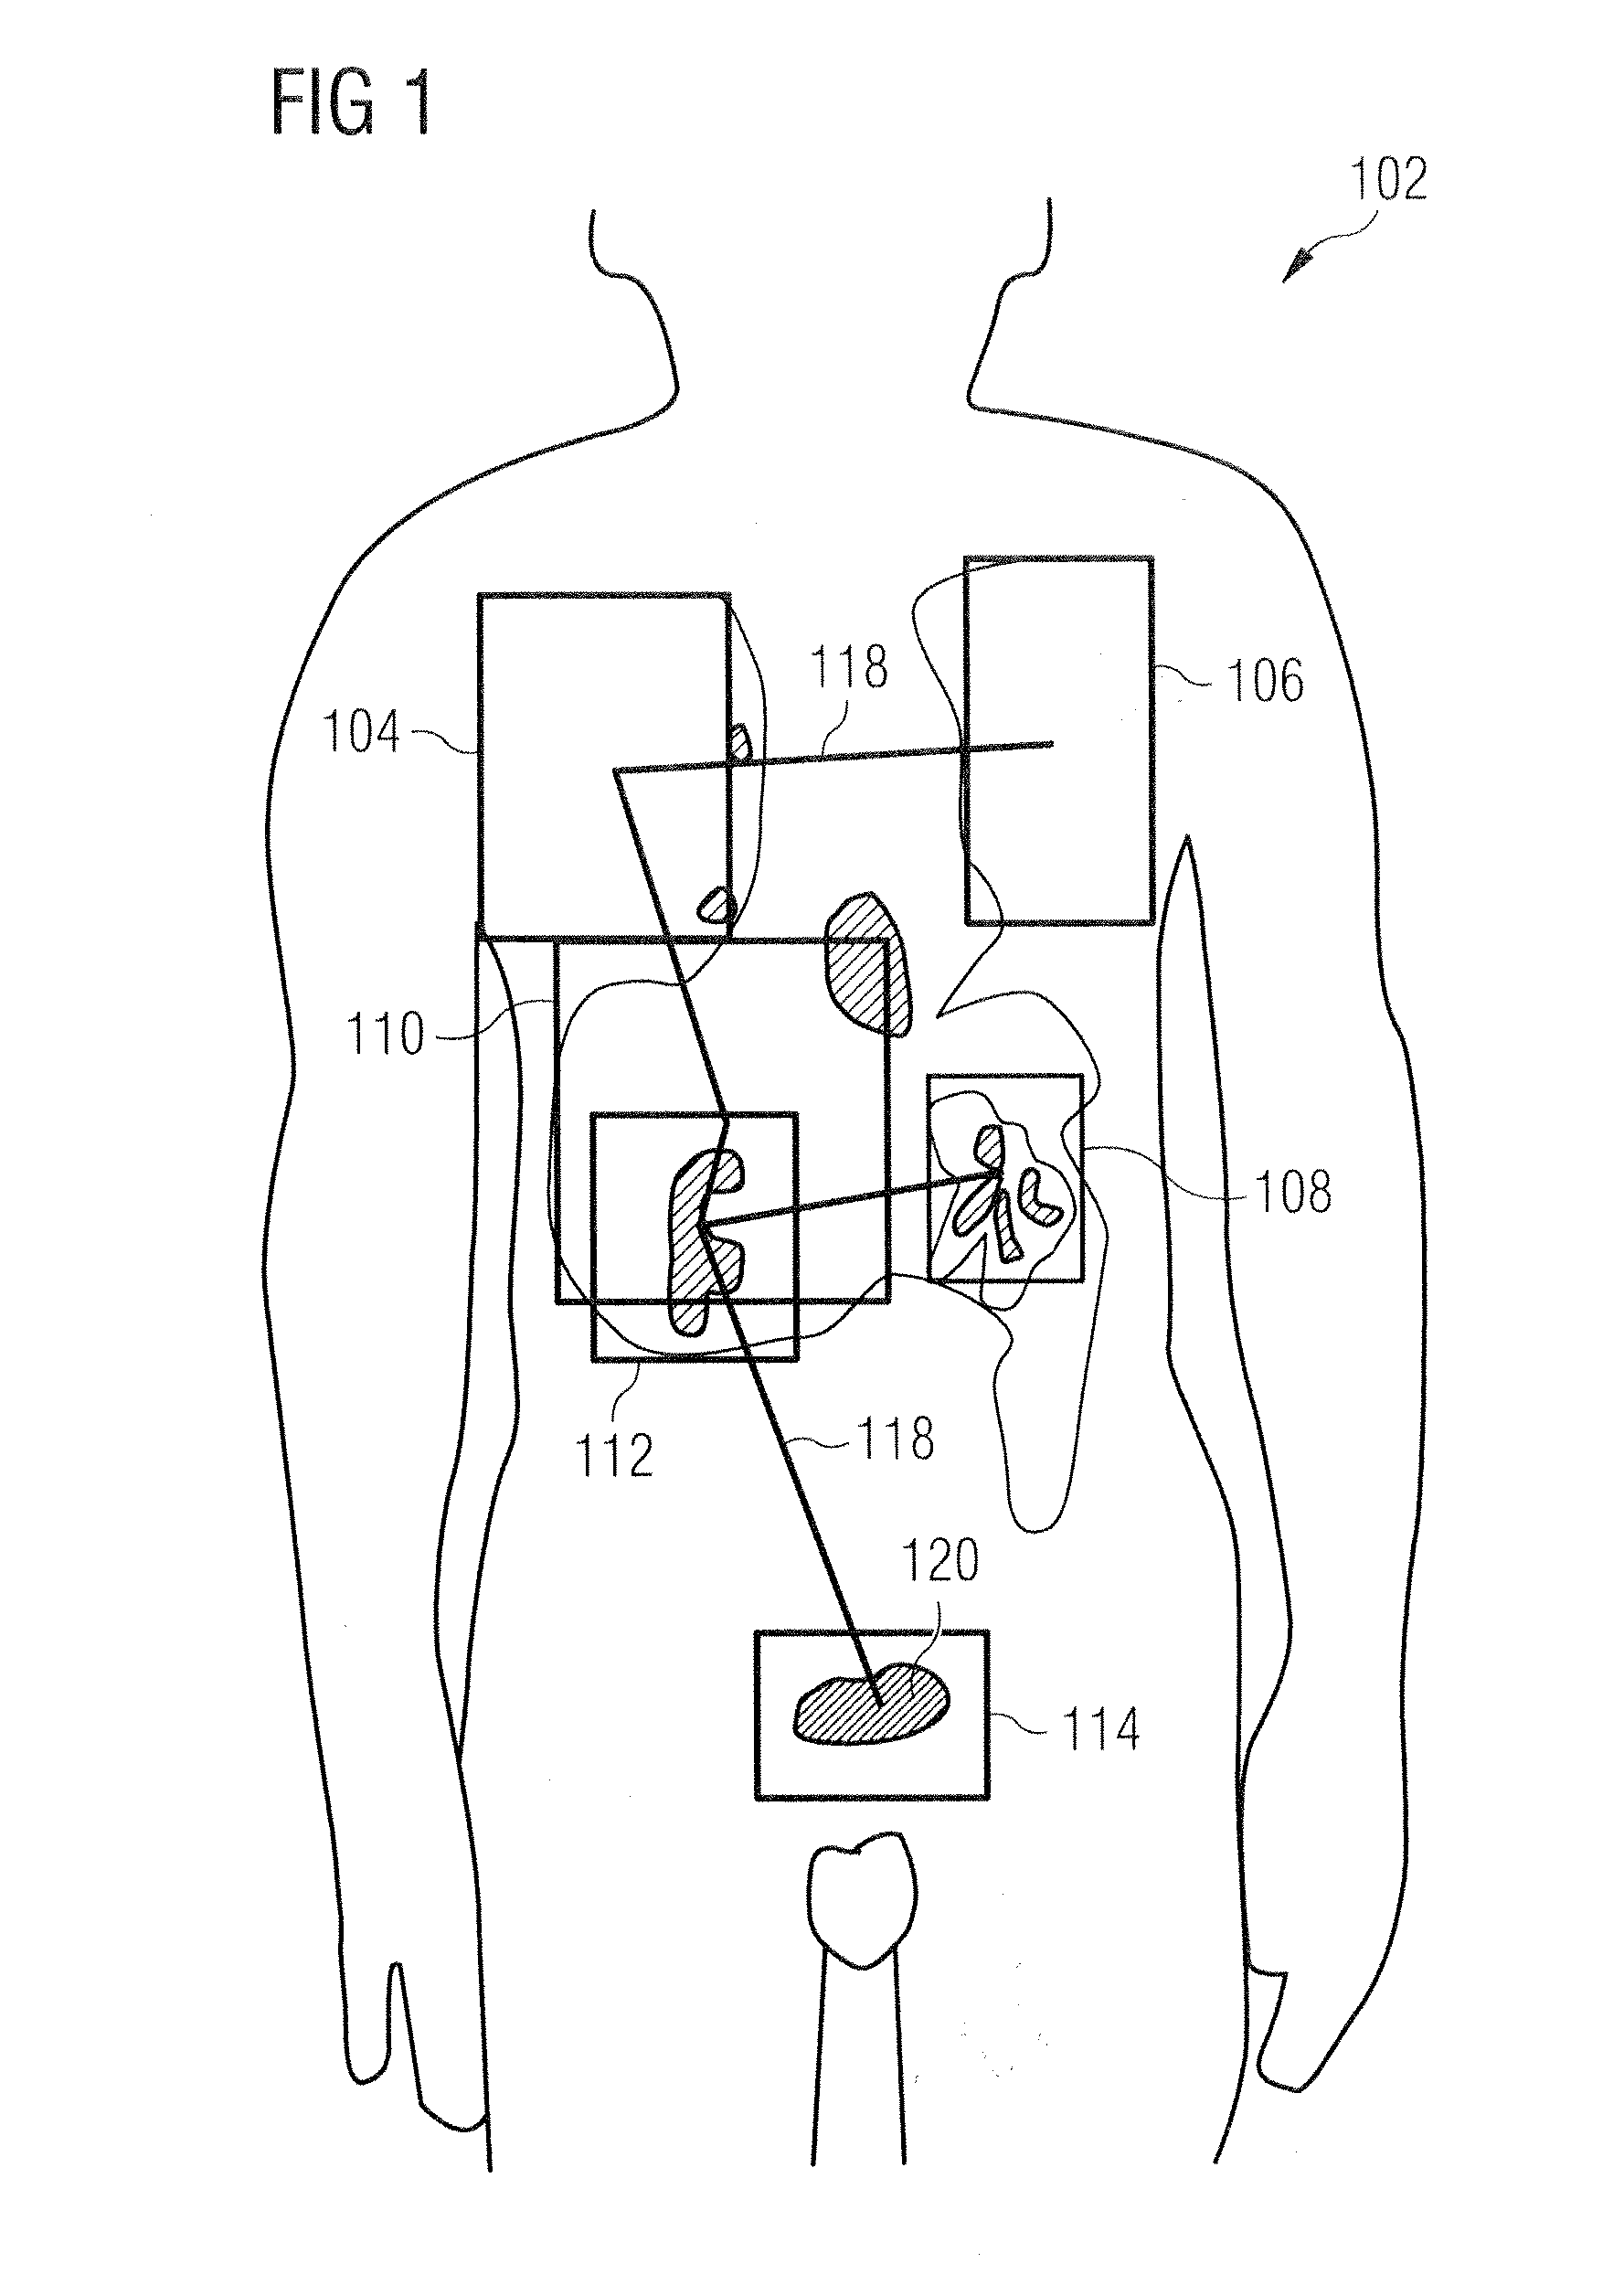 Methods and apparatus for registration of medical images